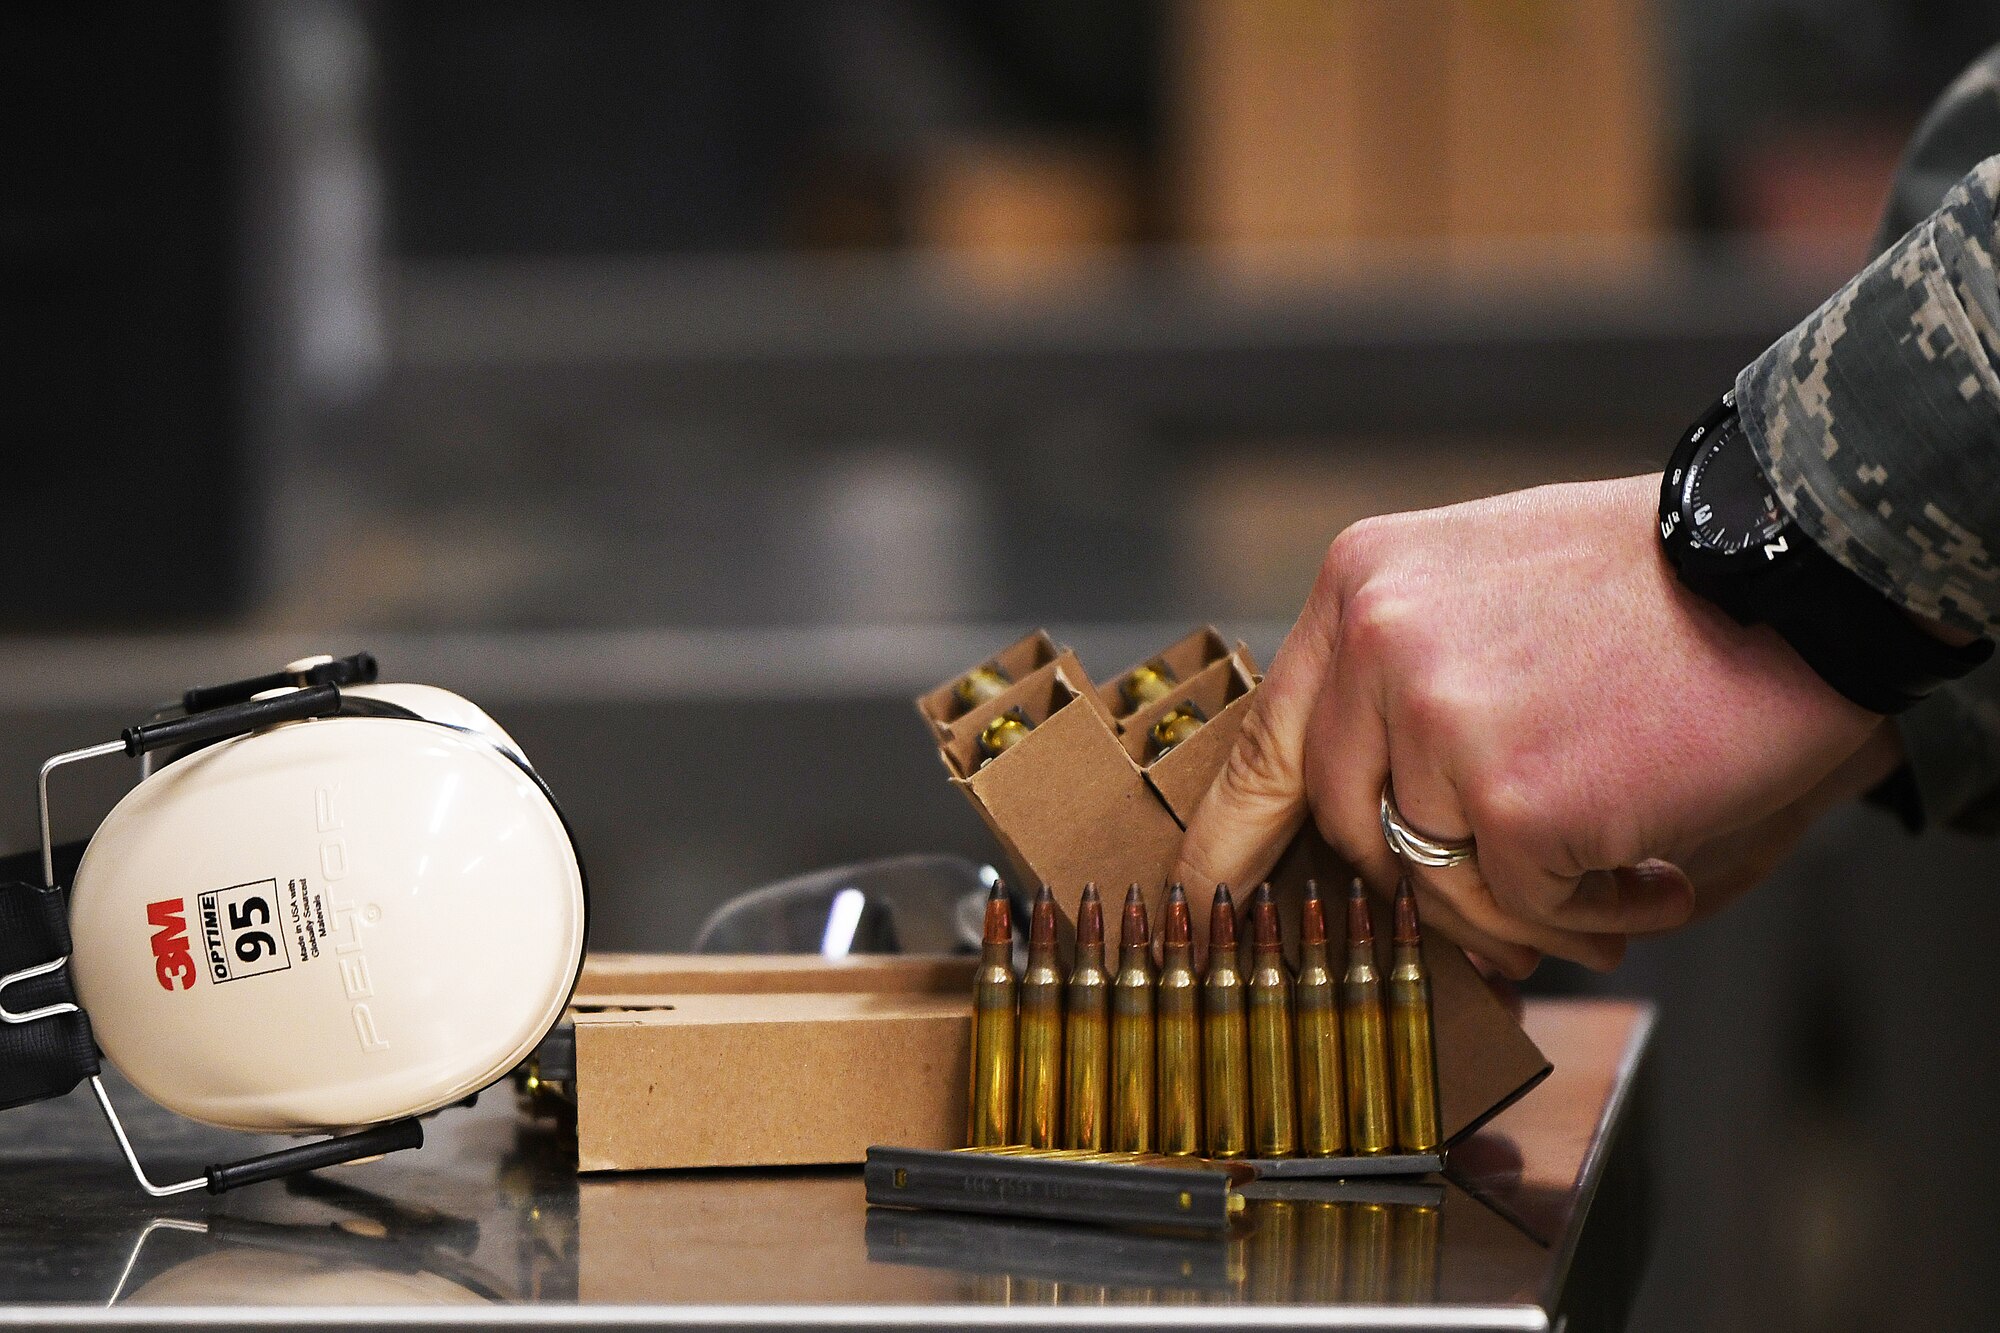 A security forces augmentee in training prepares ammunition during training at Royal Air Force Feltwell, England, April 17, 2020. The Security Forces Augmentee Program consists of a three-day course of classroom instructions and hands-on training. (U.S. Air Force photo by Senior Airman Shanice Williams-Jones)